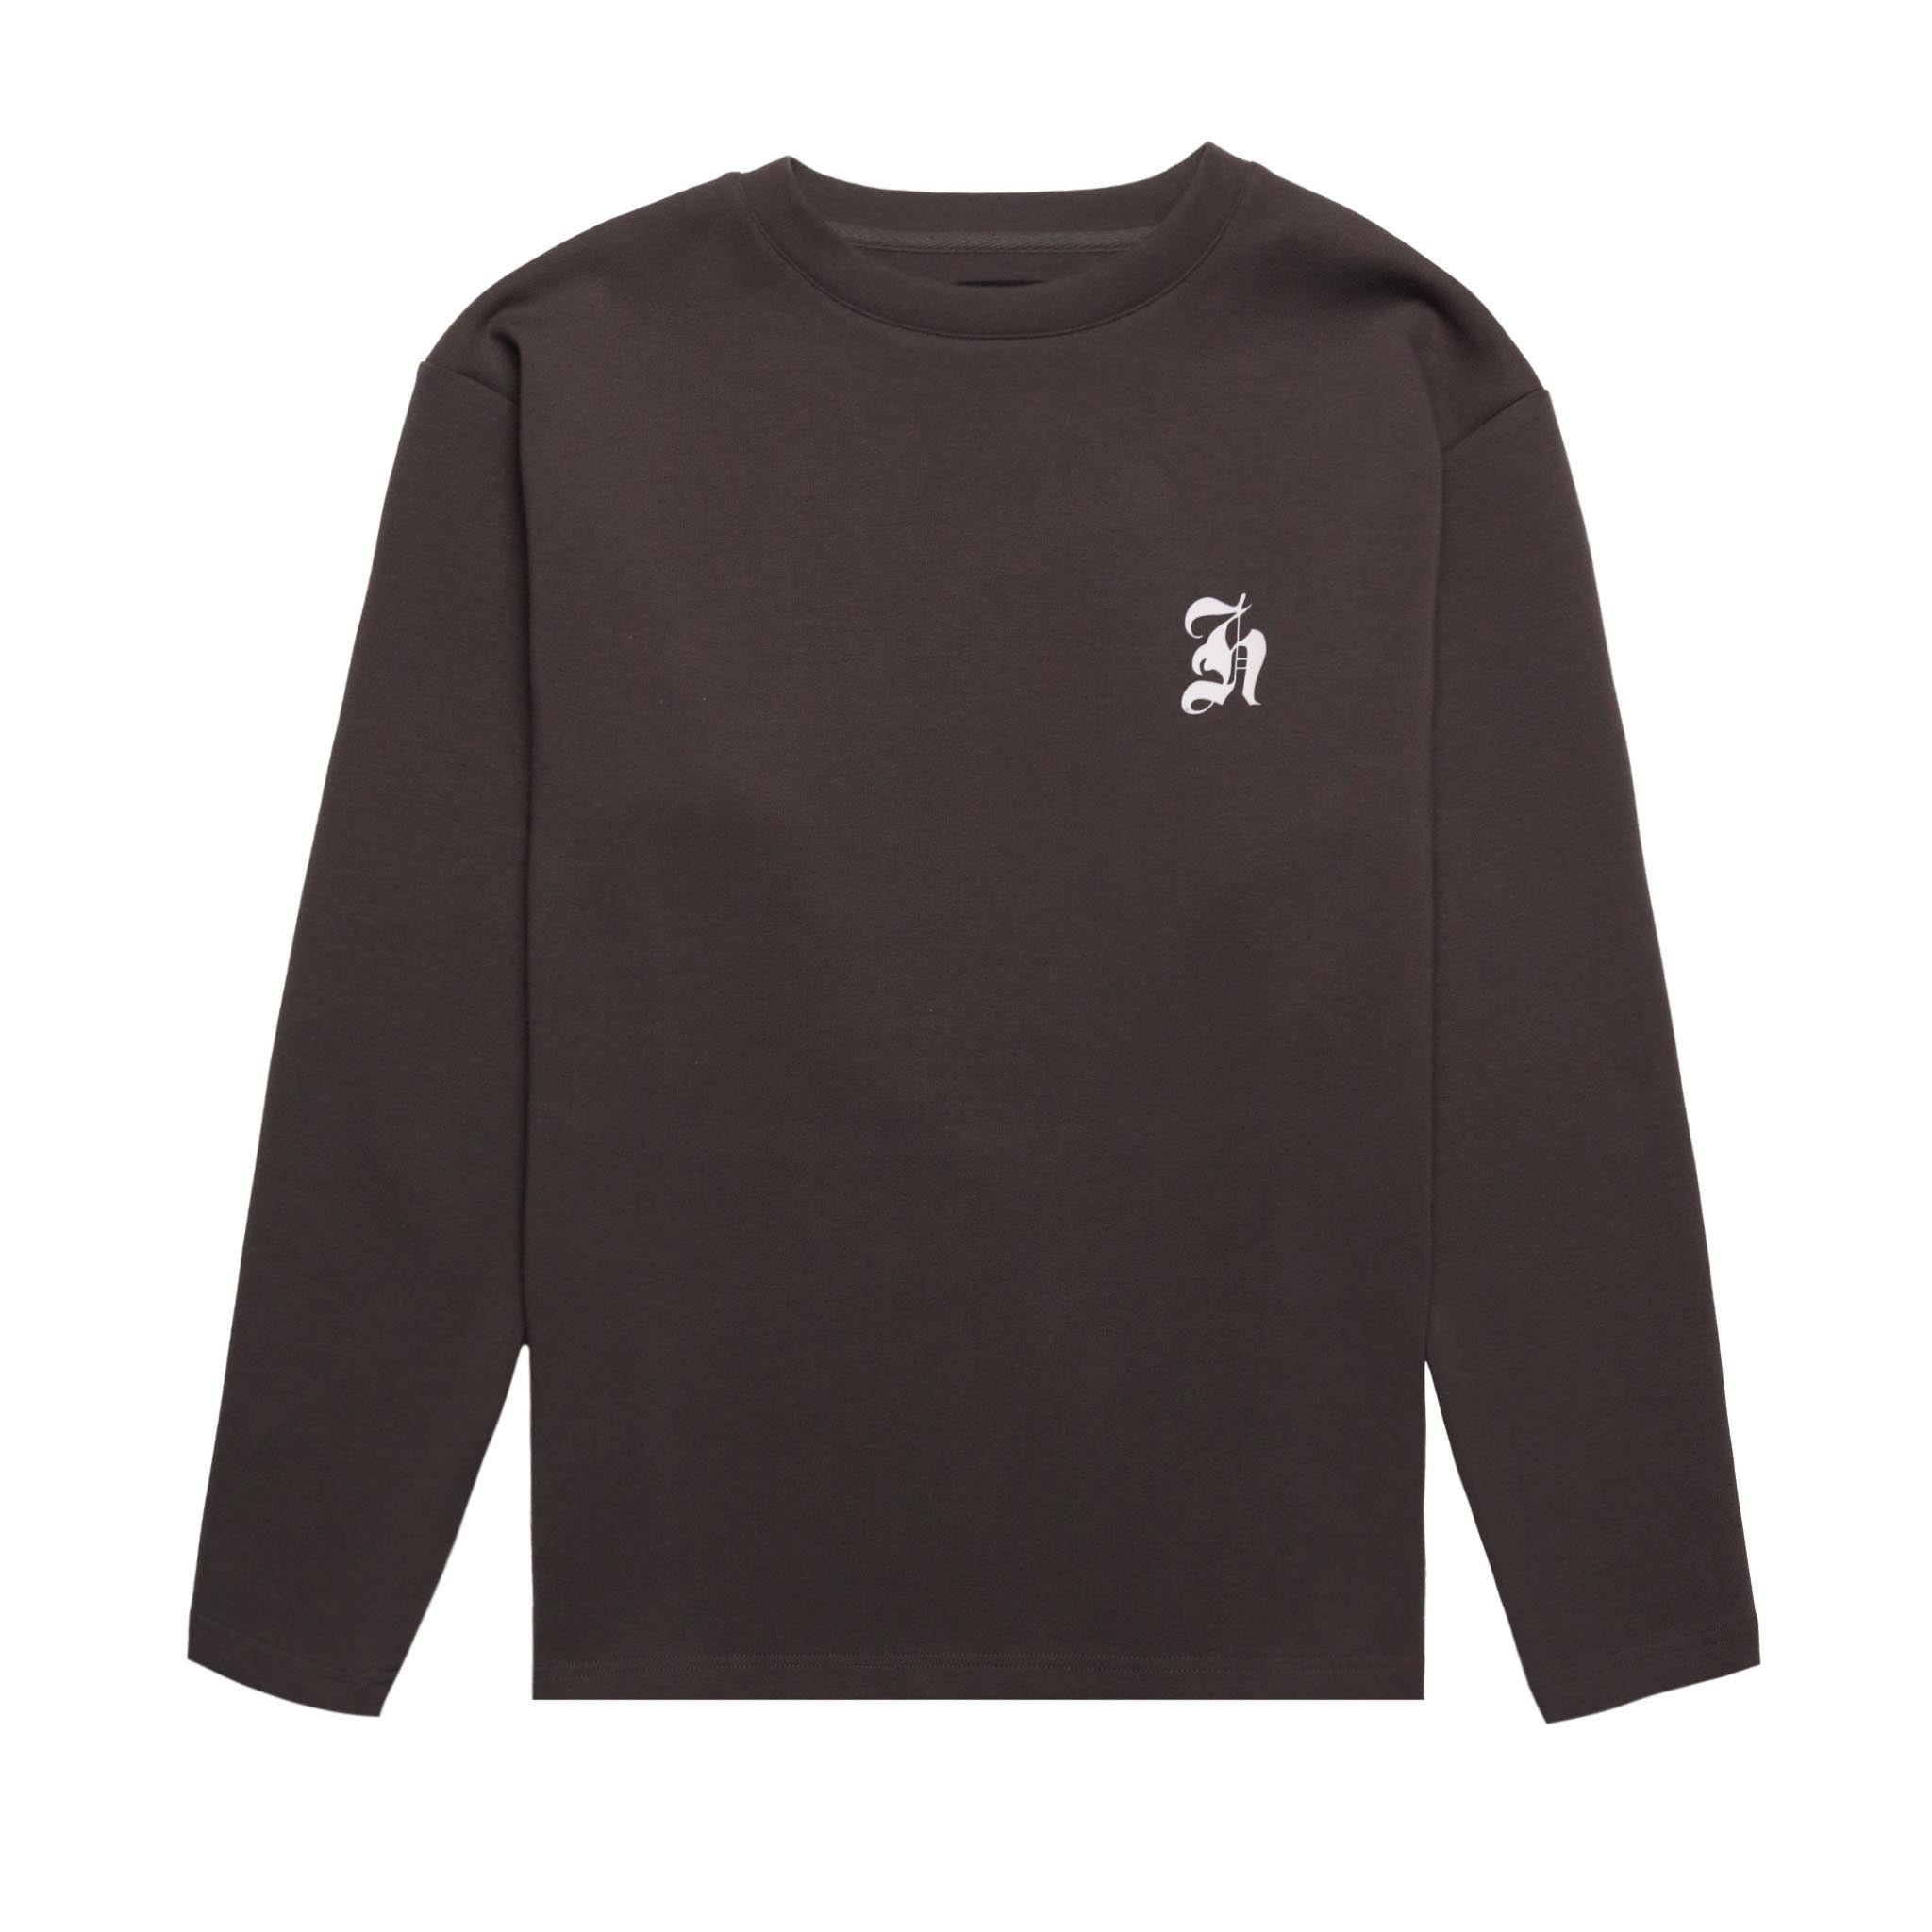 HOMME+ Old English Script L/S Tee Charcoal